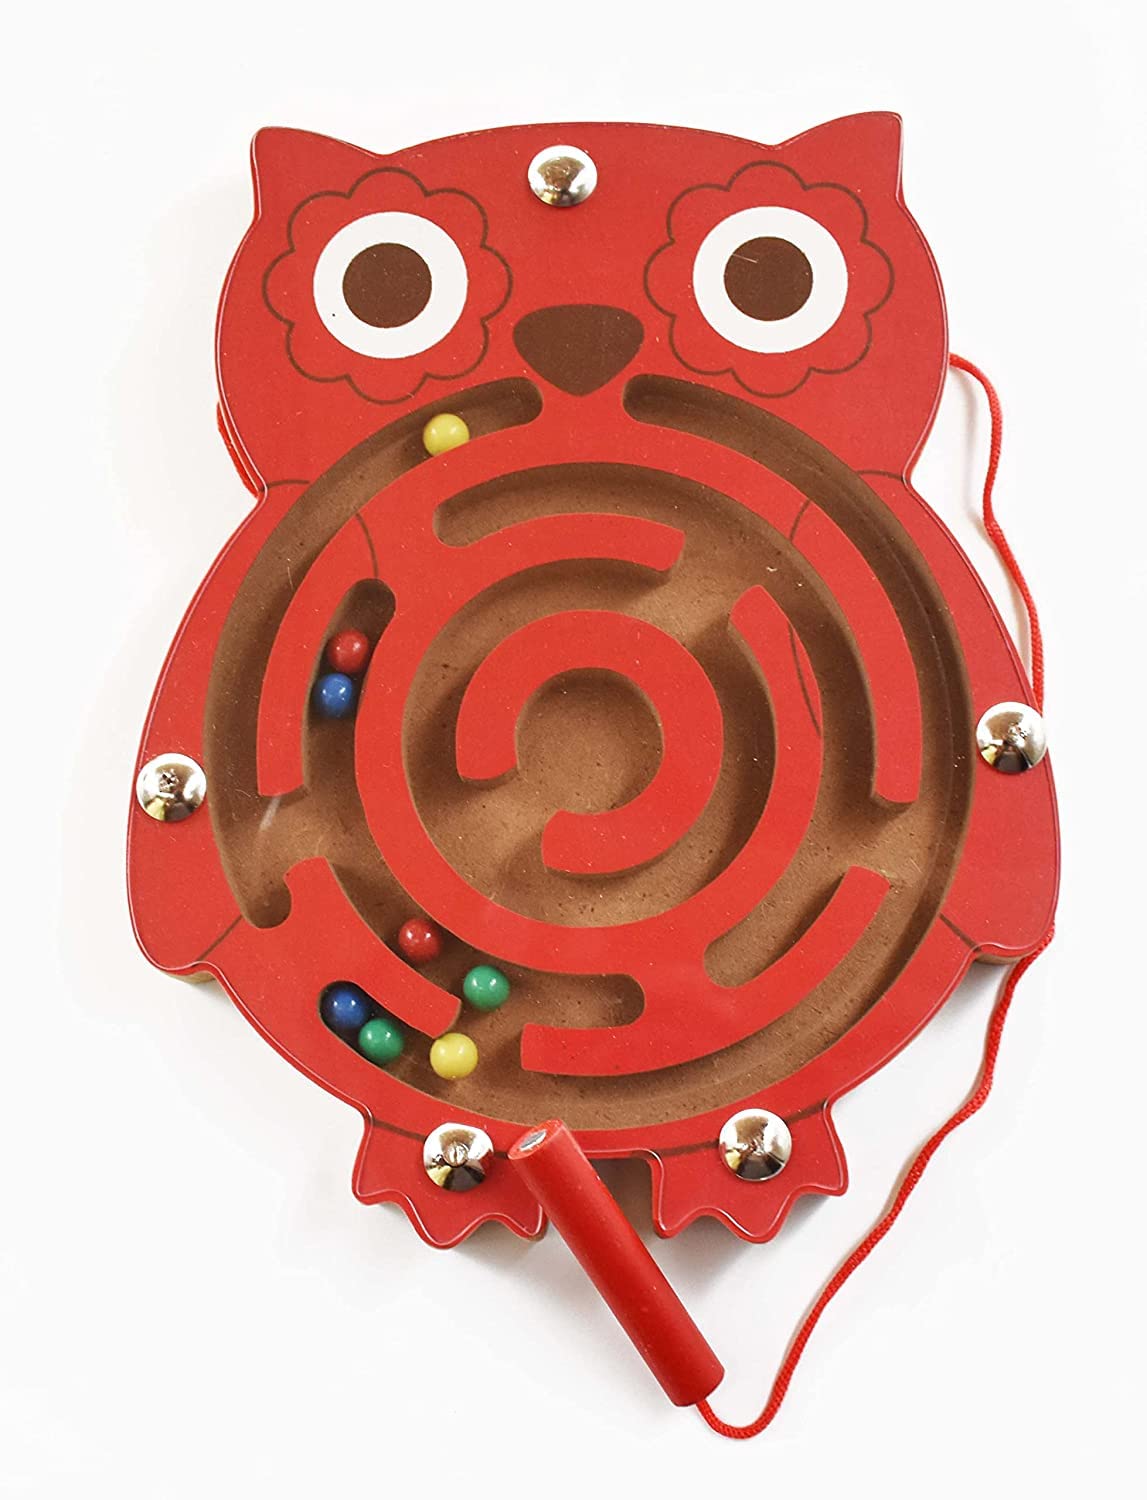 Wooden Maze Toys Round Wooden Labyrinth Maze Toys Brain Teaser Puzzle Game